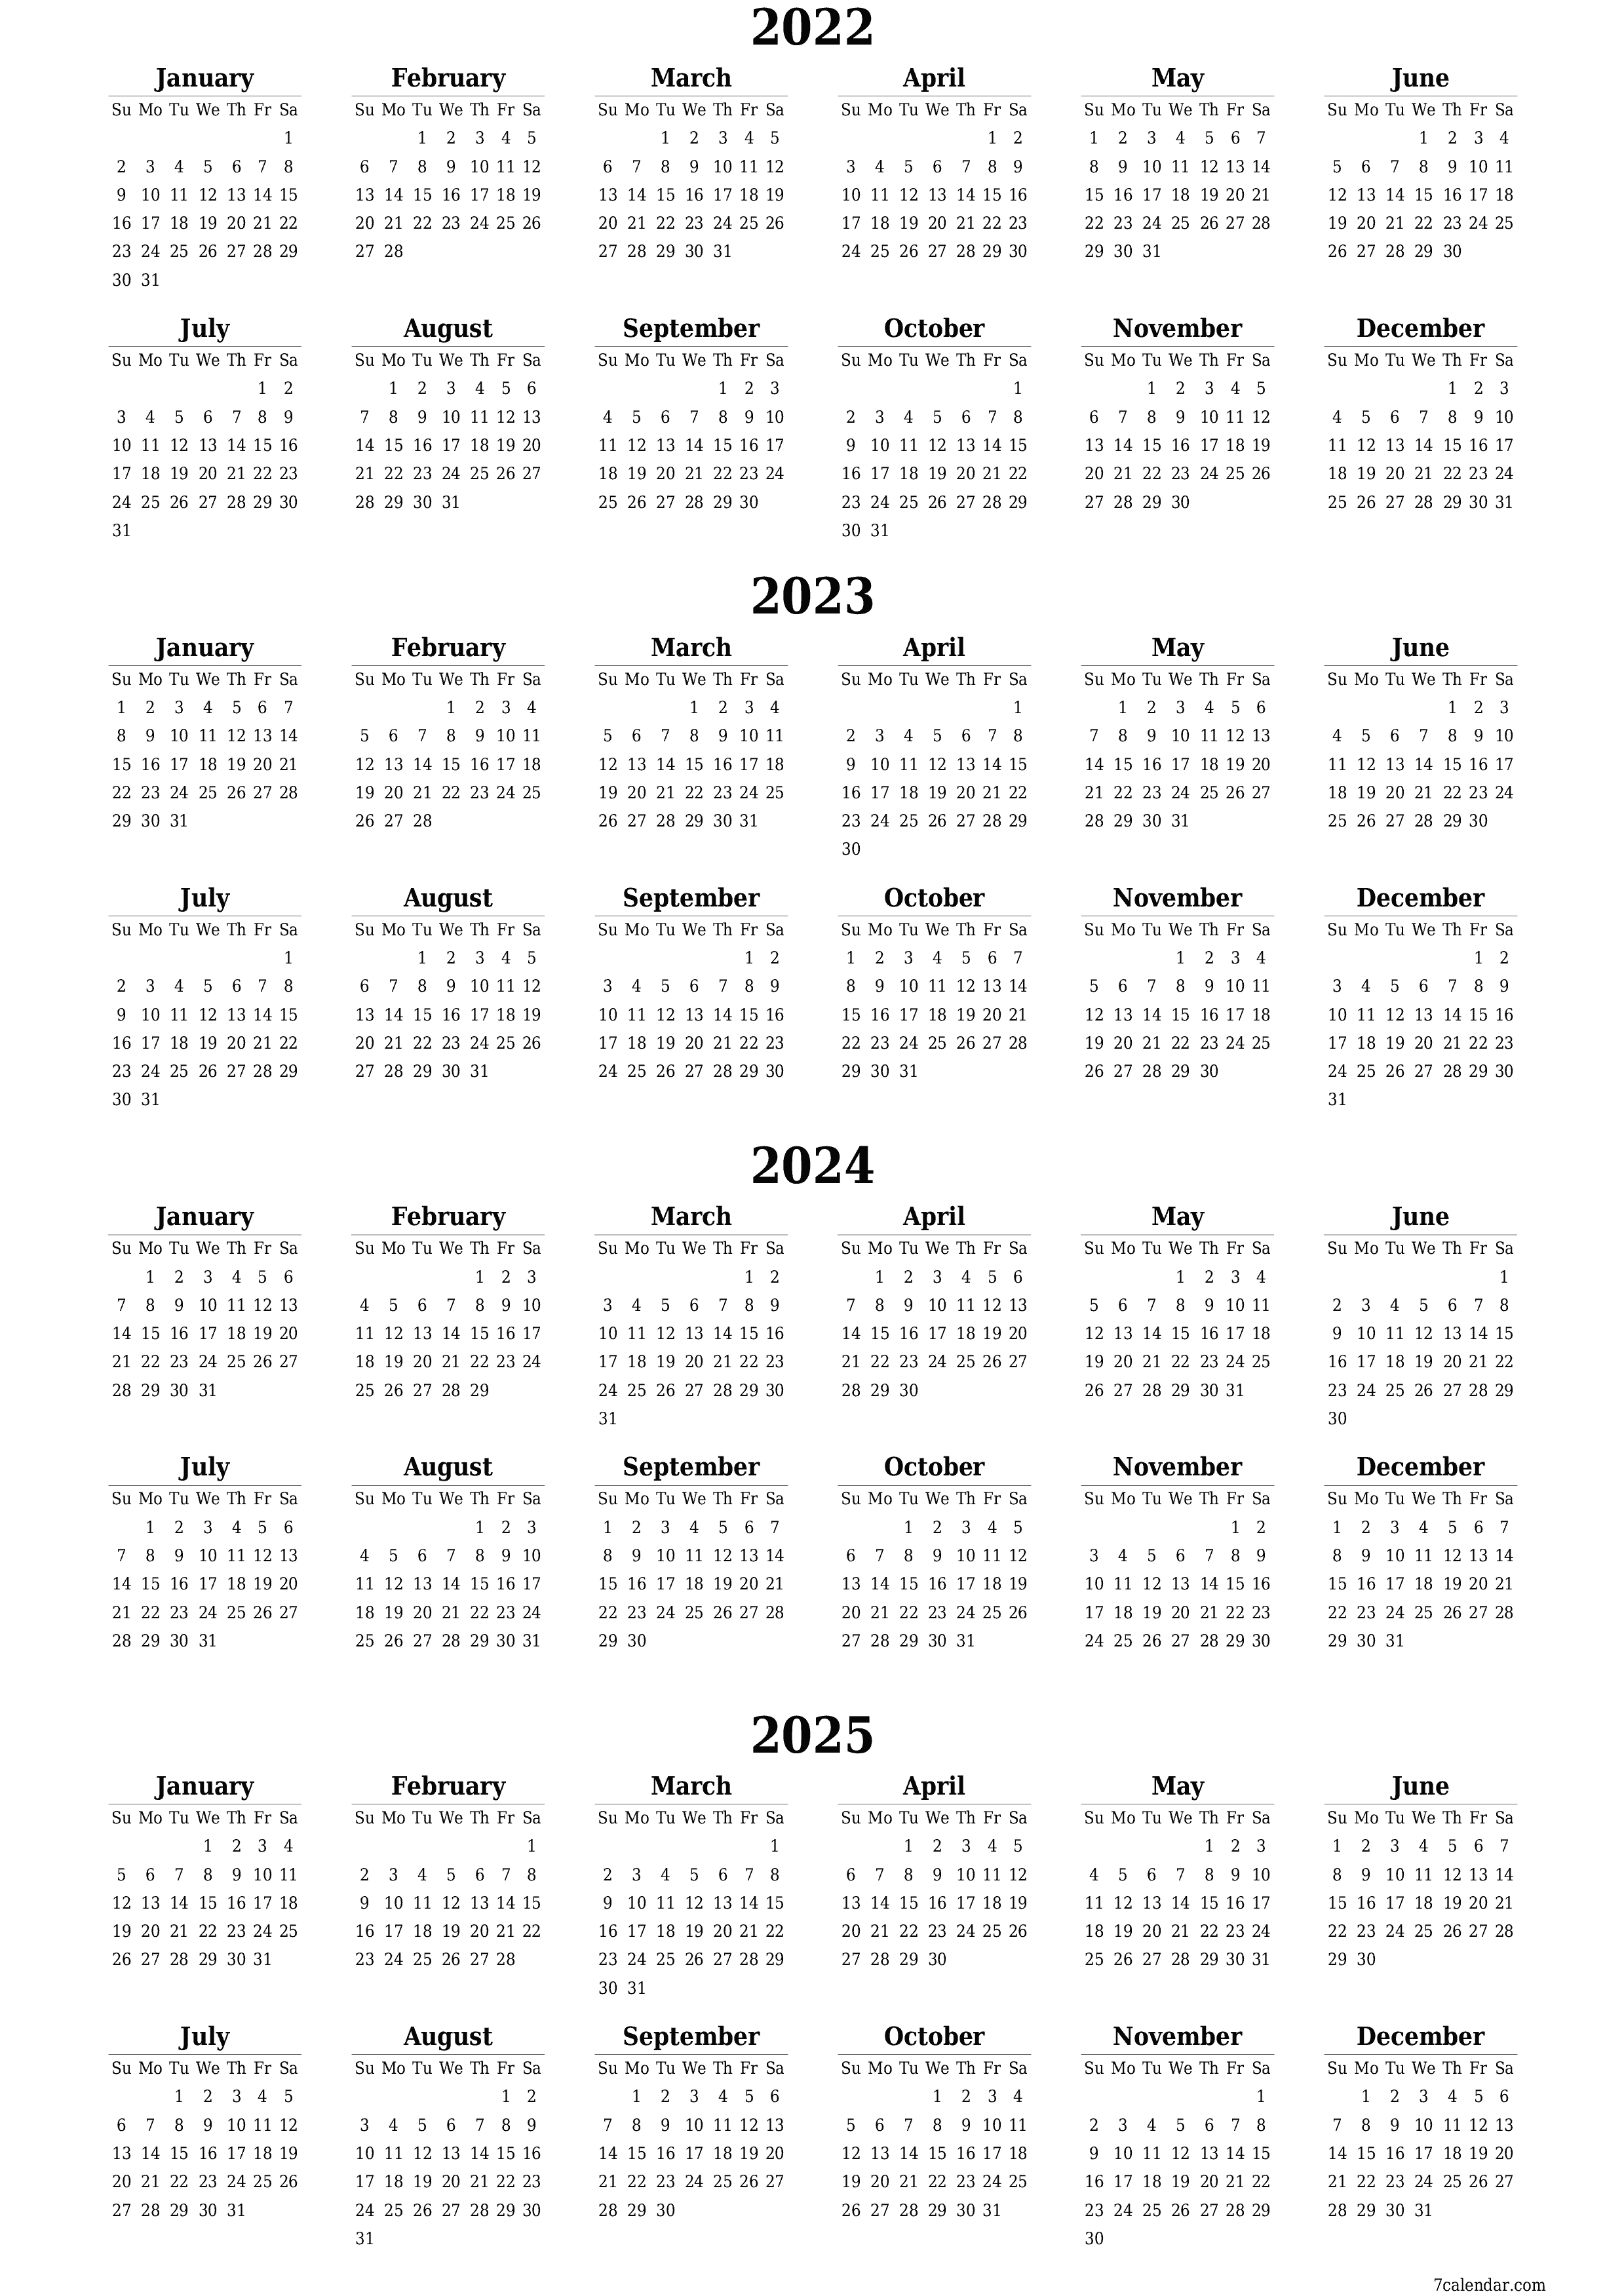 printable wall template free vertical Yearly calendar February (Feb) 2022